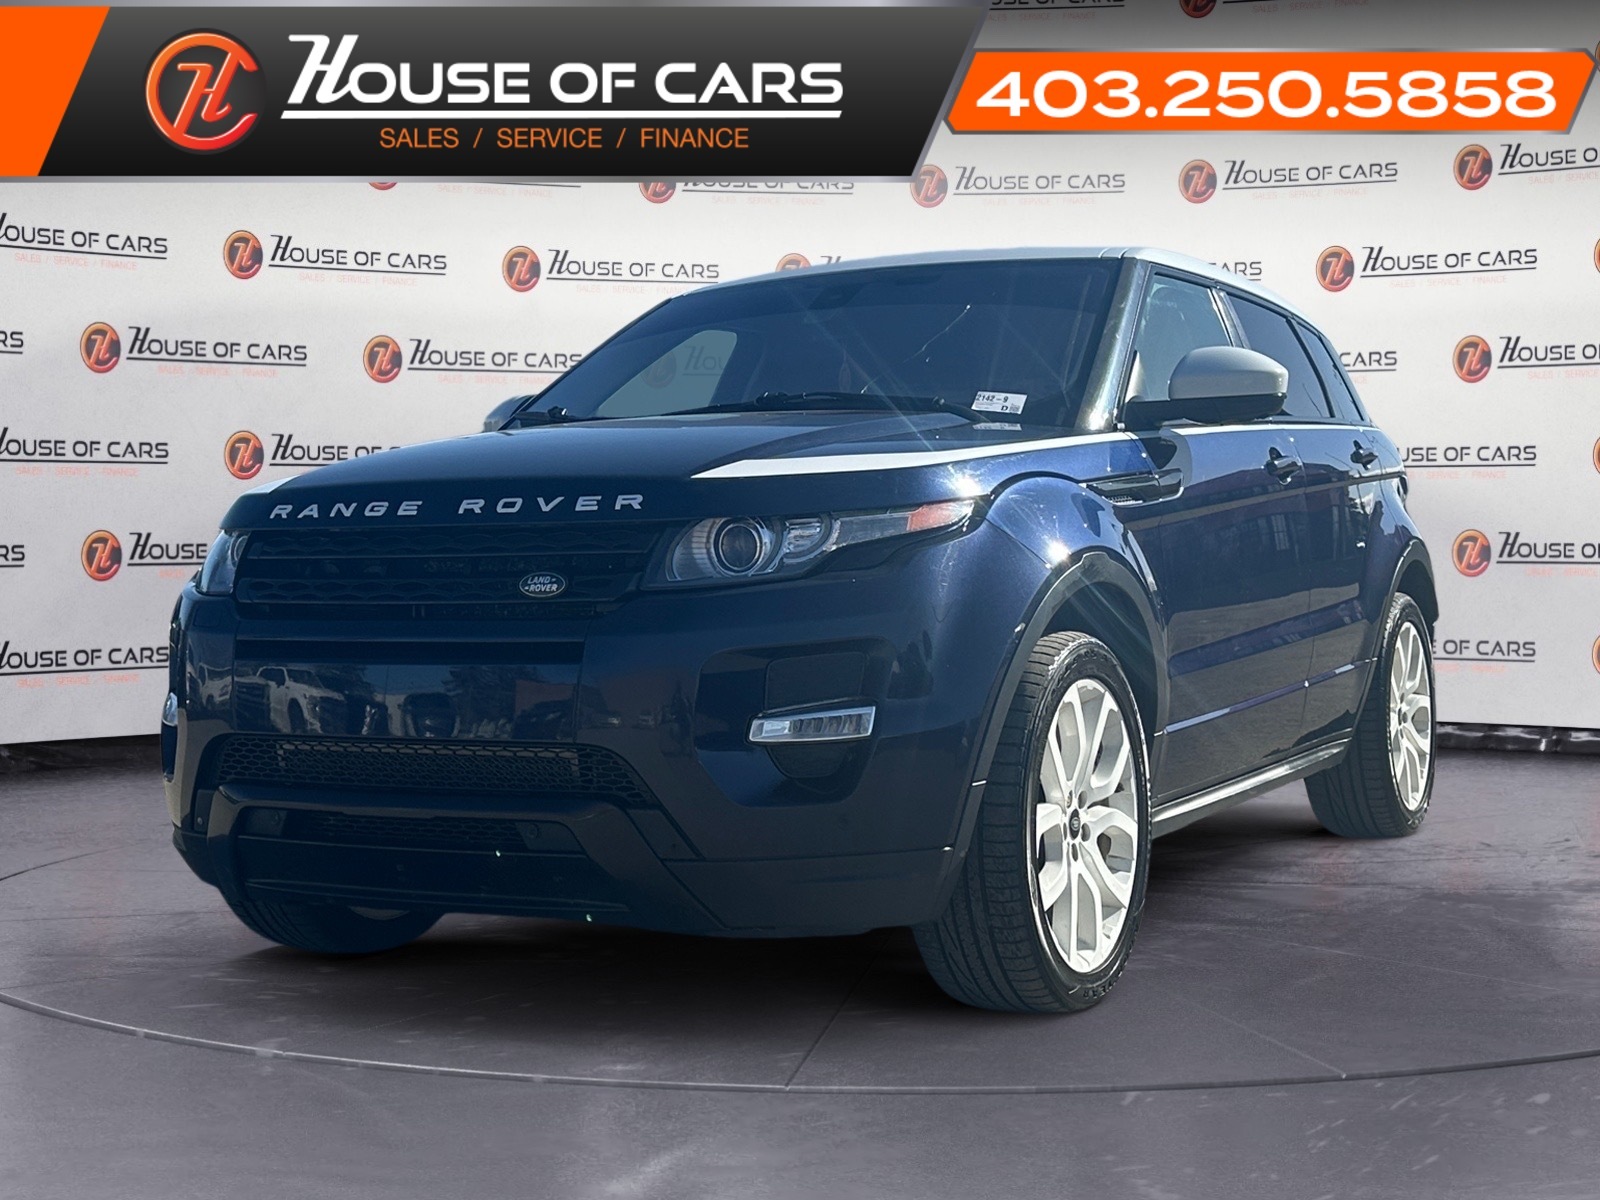 2015 Land Rover Range Rover Evoque 5dr HB Dynamic WITH/ HEATED SEATS AND STEERING